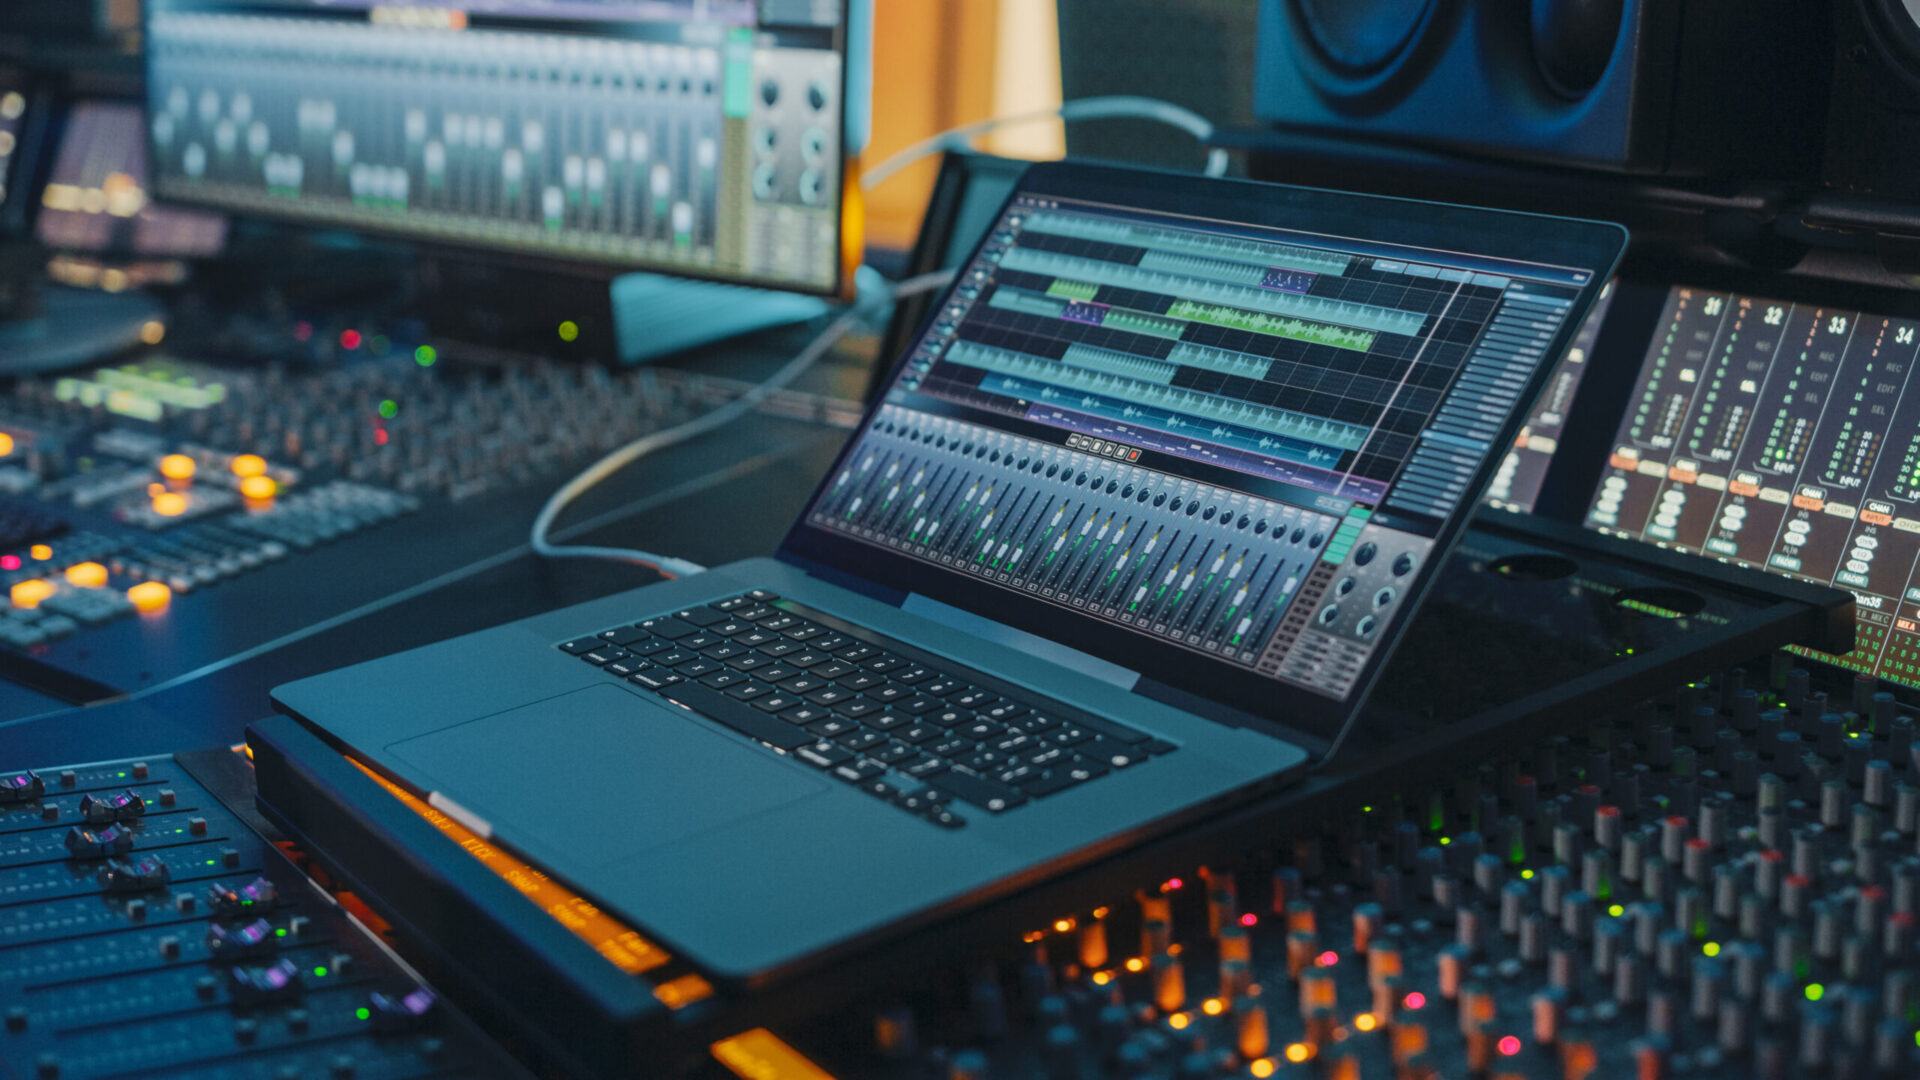 A laptop on a desk in a recording studio during Experience Days.